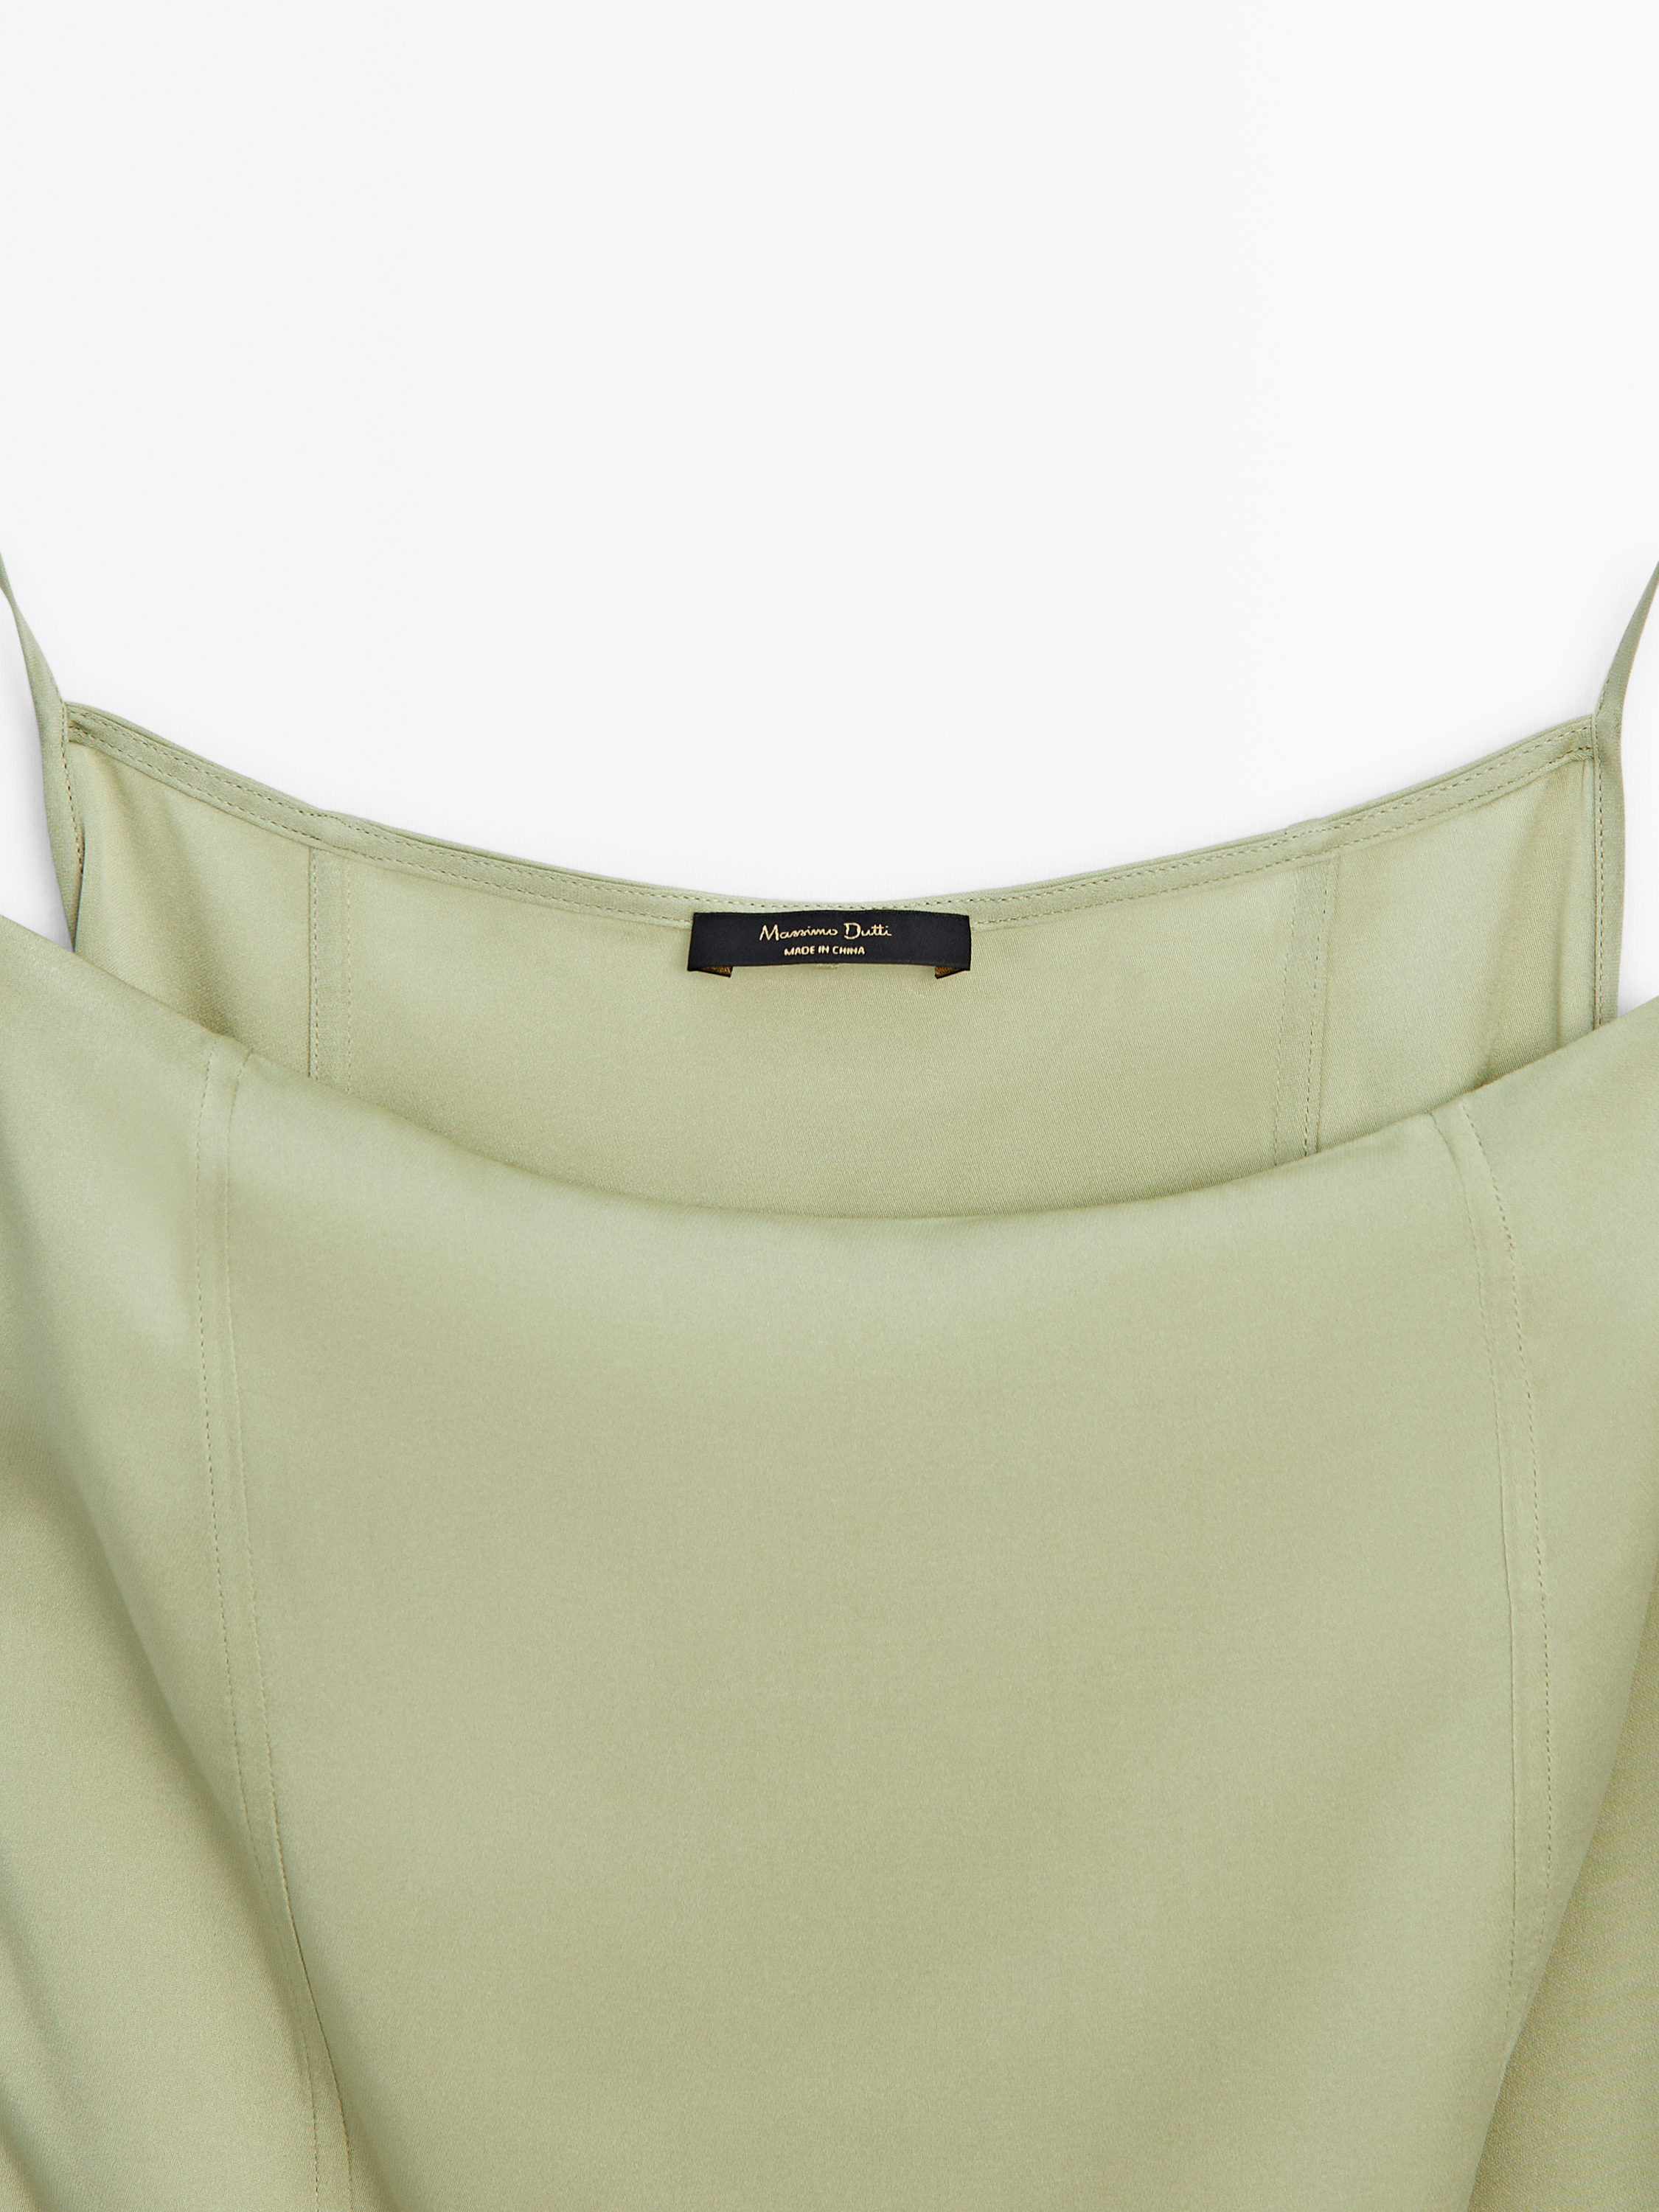 Camisole top with tie detail